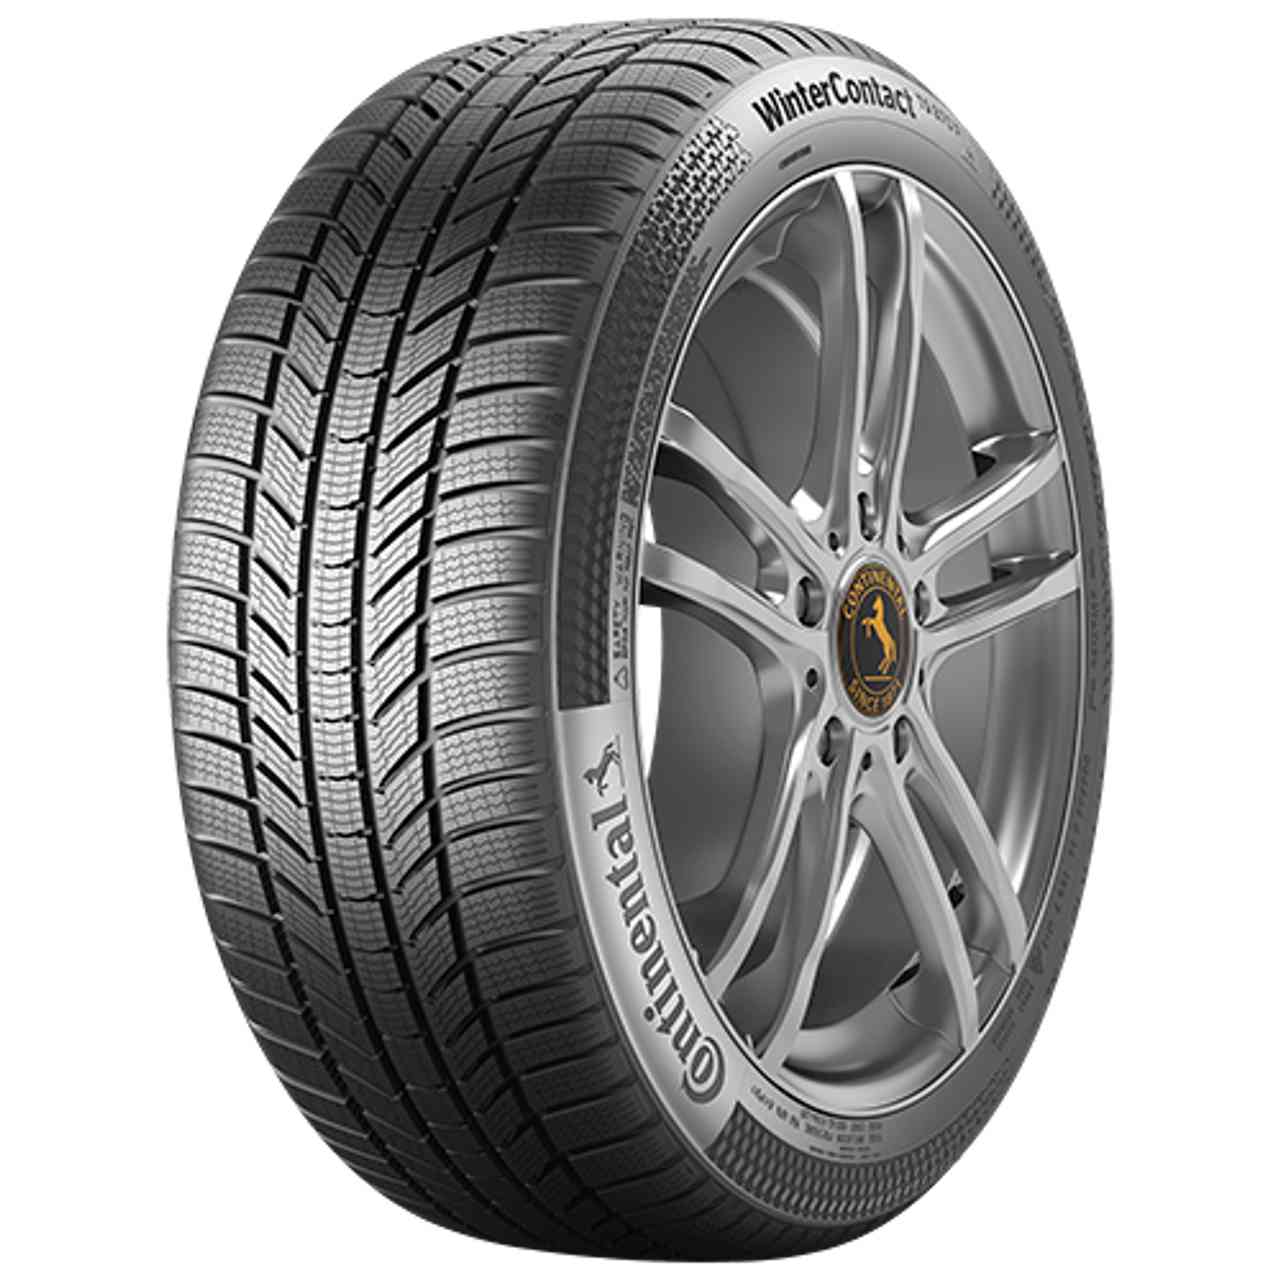 CONTINENTAL WINTERCONTACT TS 870 P (EVc) 195/55R20 95H BSW XL